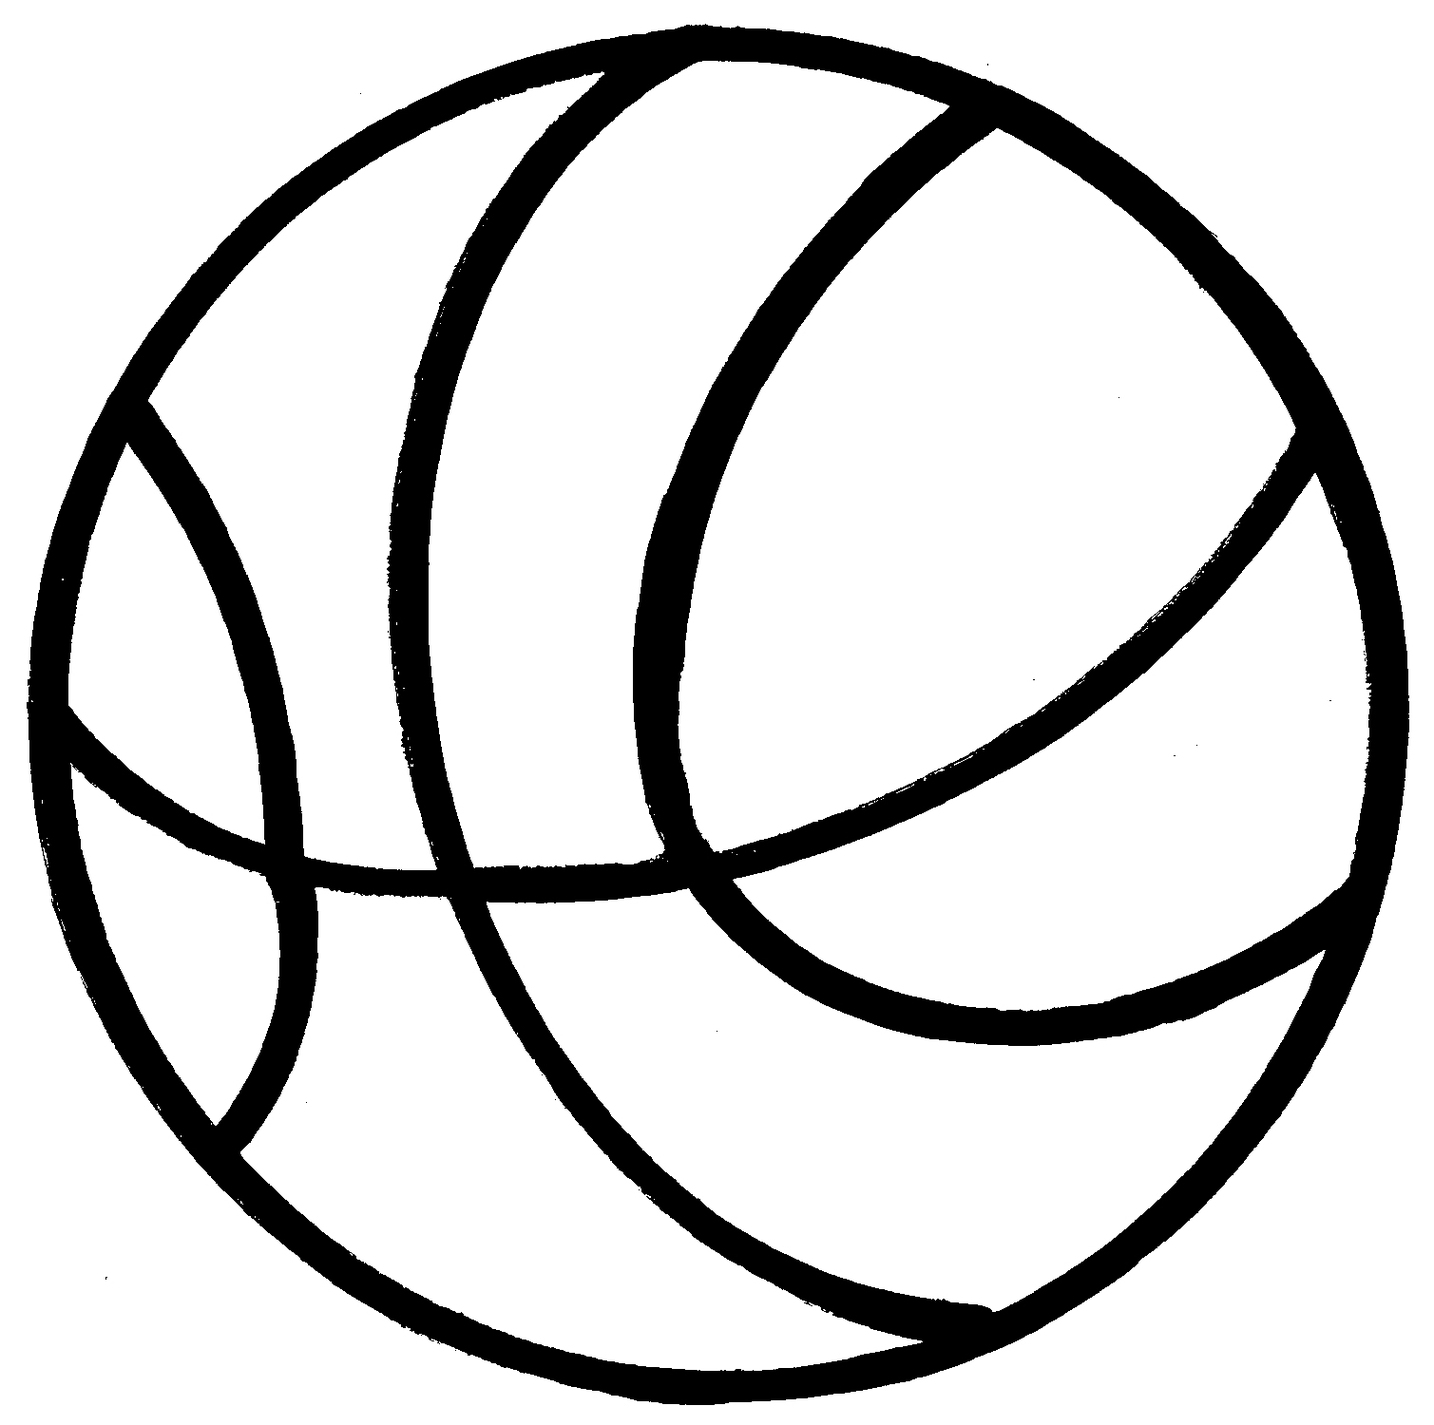 Basketball Ball Black And White Images Clipart - Free to use Clip ...